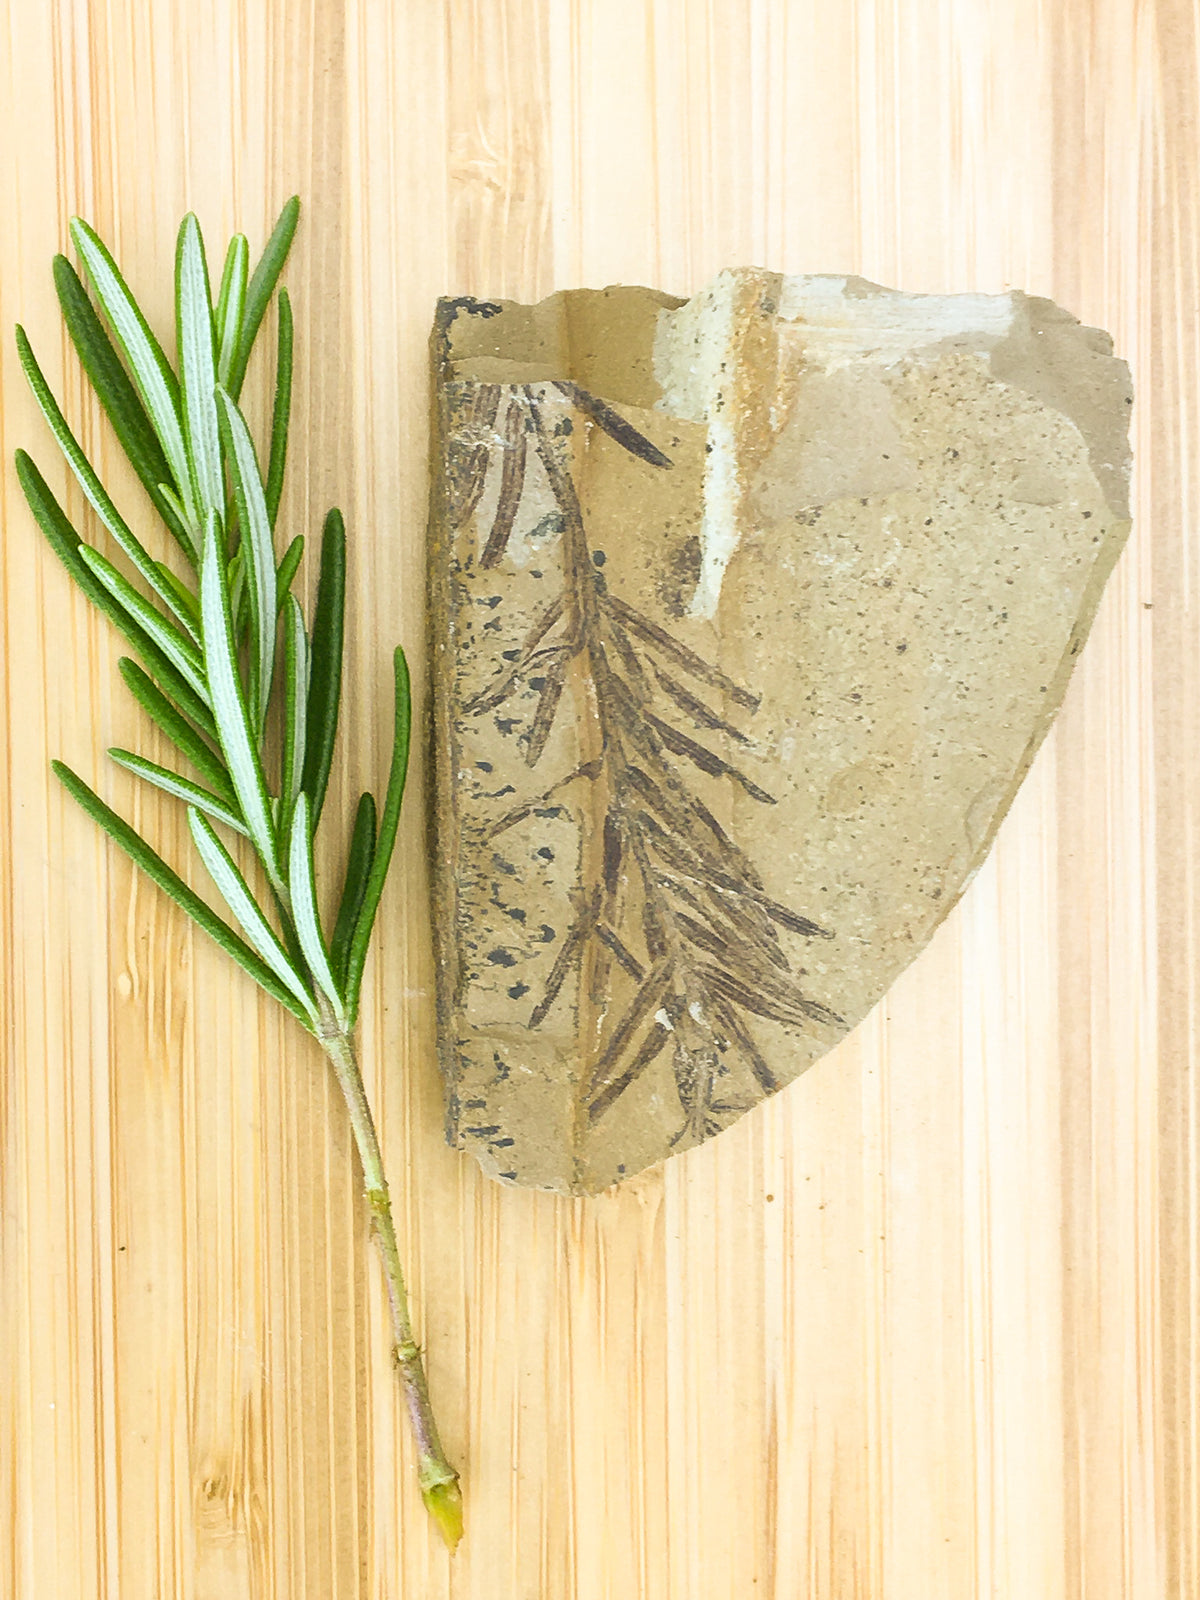 Metasequoia leaf on a flat grey sedimentary rock. The  fossil is lying on a grained wood surface, it is contrasted with a sprig of fresh rosemary